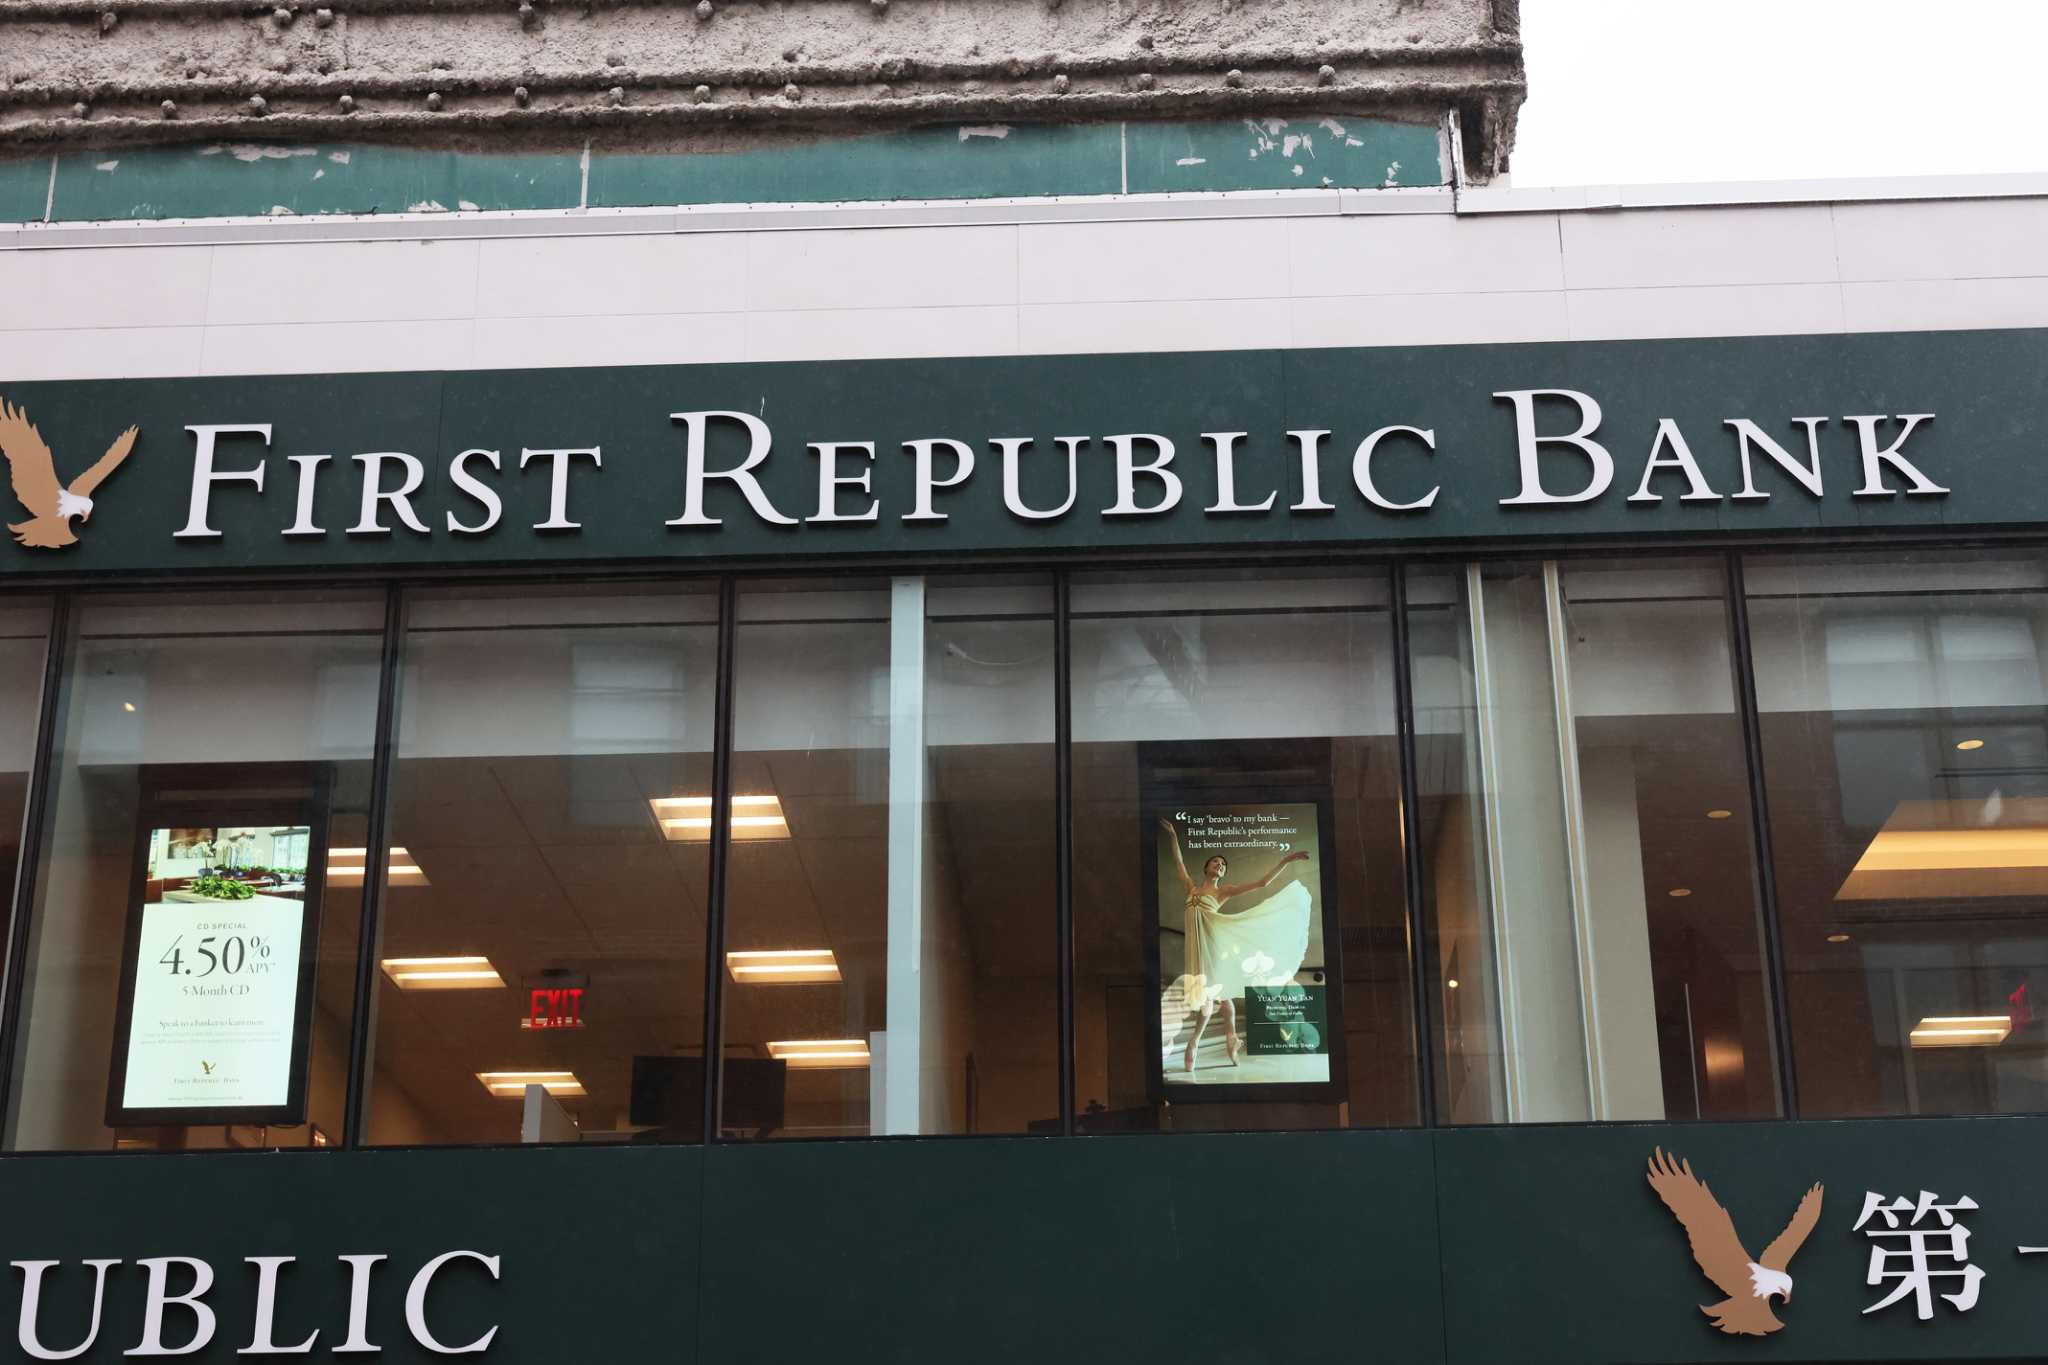 Saai mini domein S.F.-based First Republic Bank exploring potential sale, Bloomberg rep